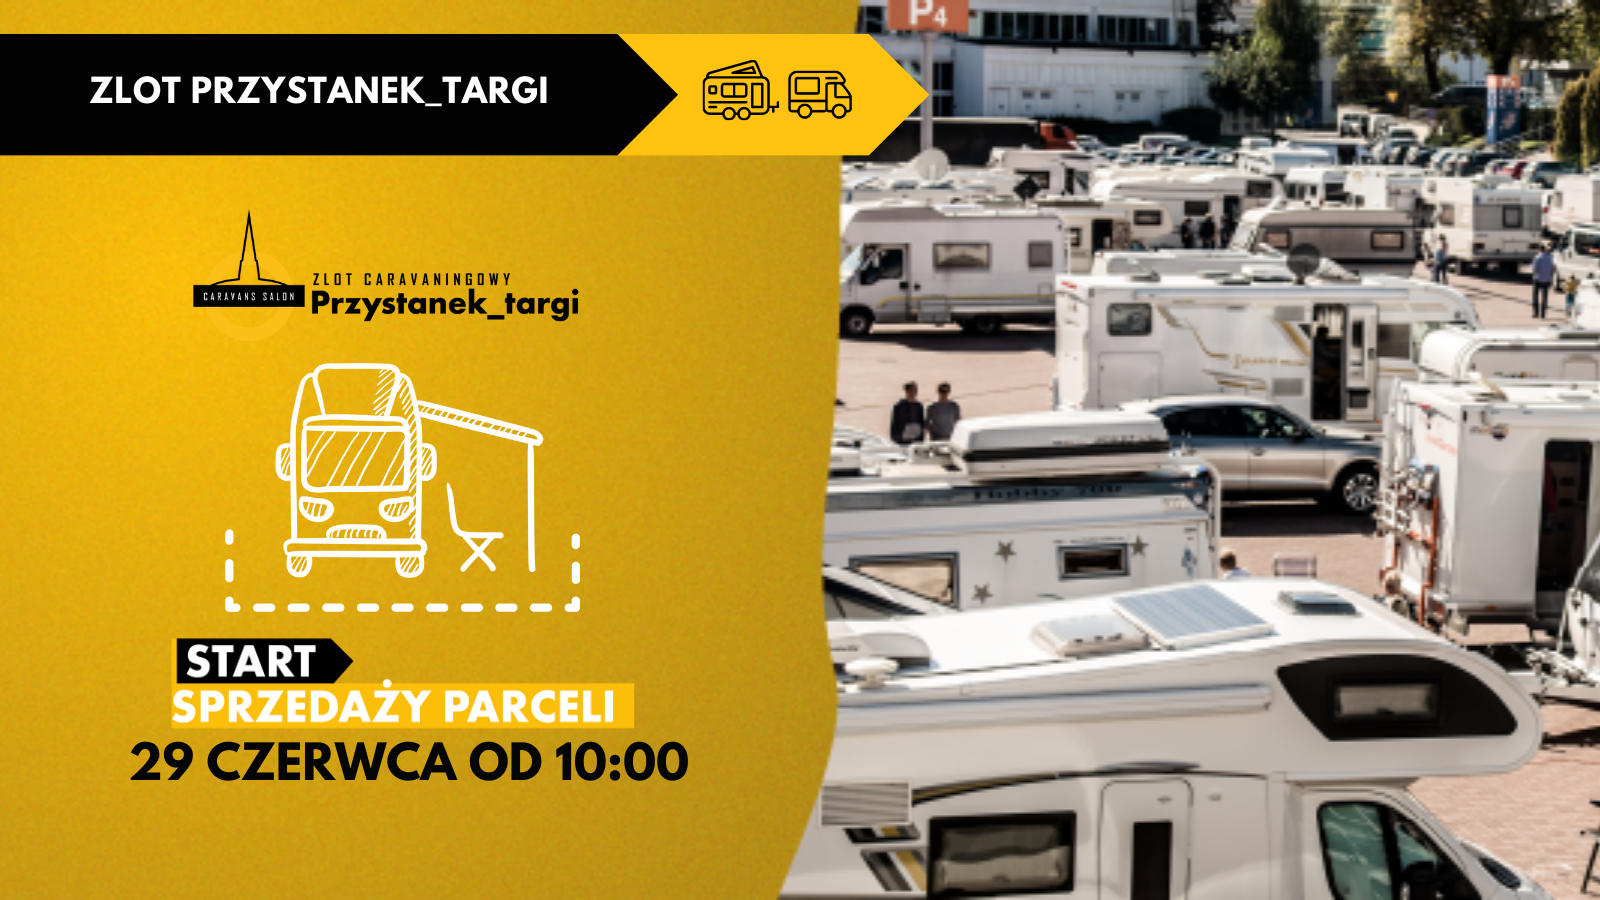 The sale of the Lot for the Przystanek_targi rally will start on June 29 – main image